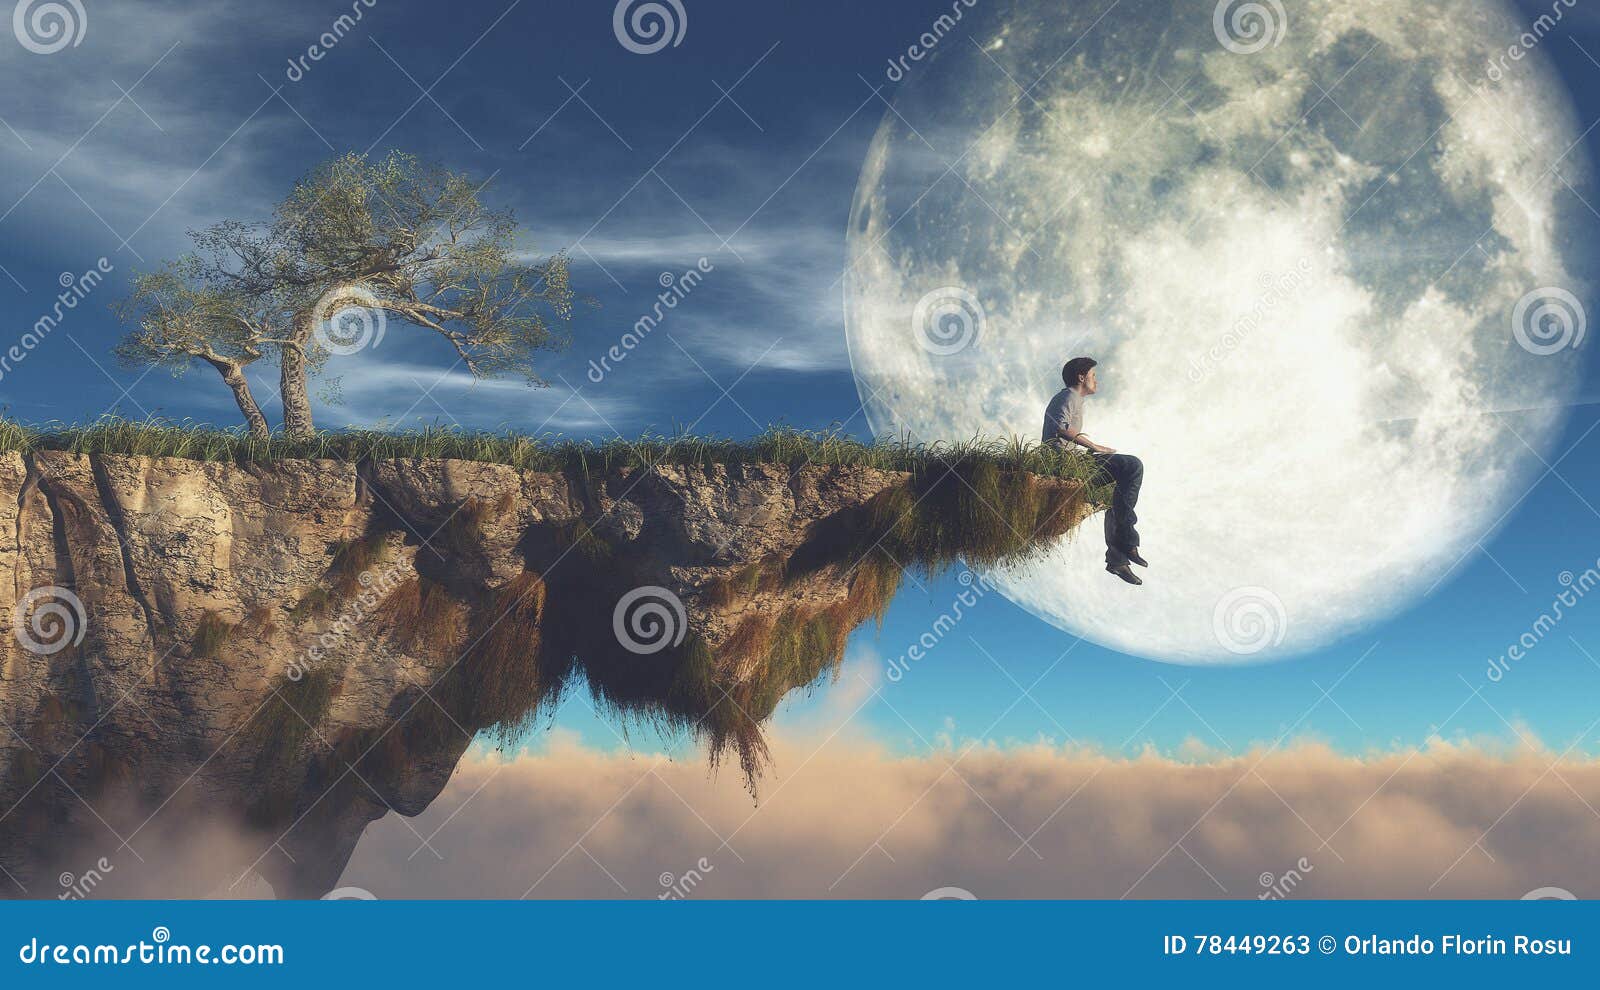 man on the edge of a cliff